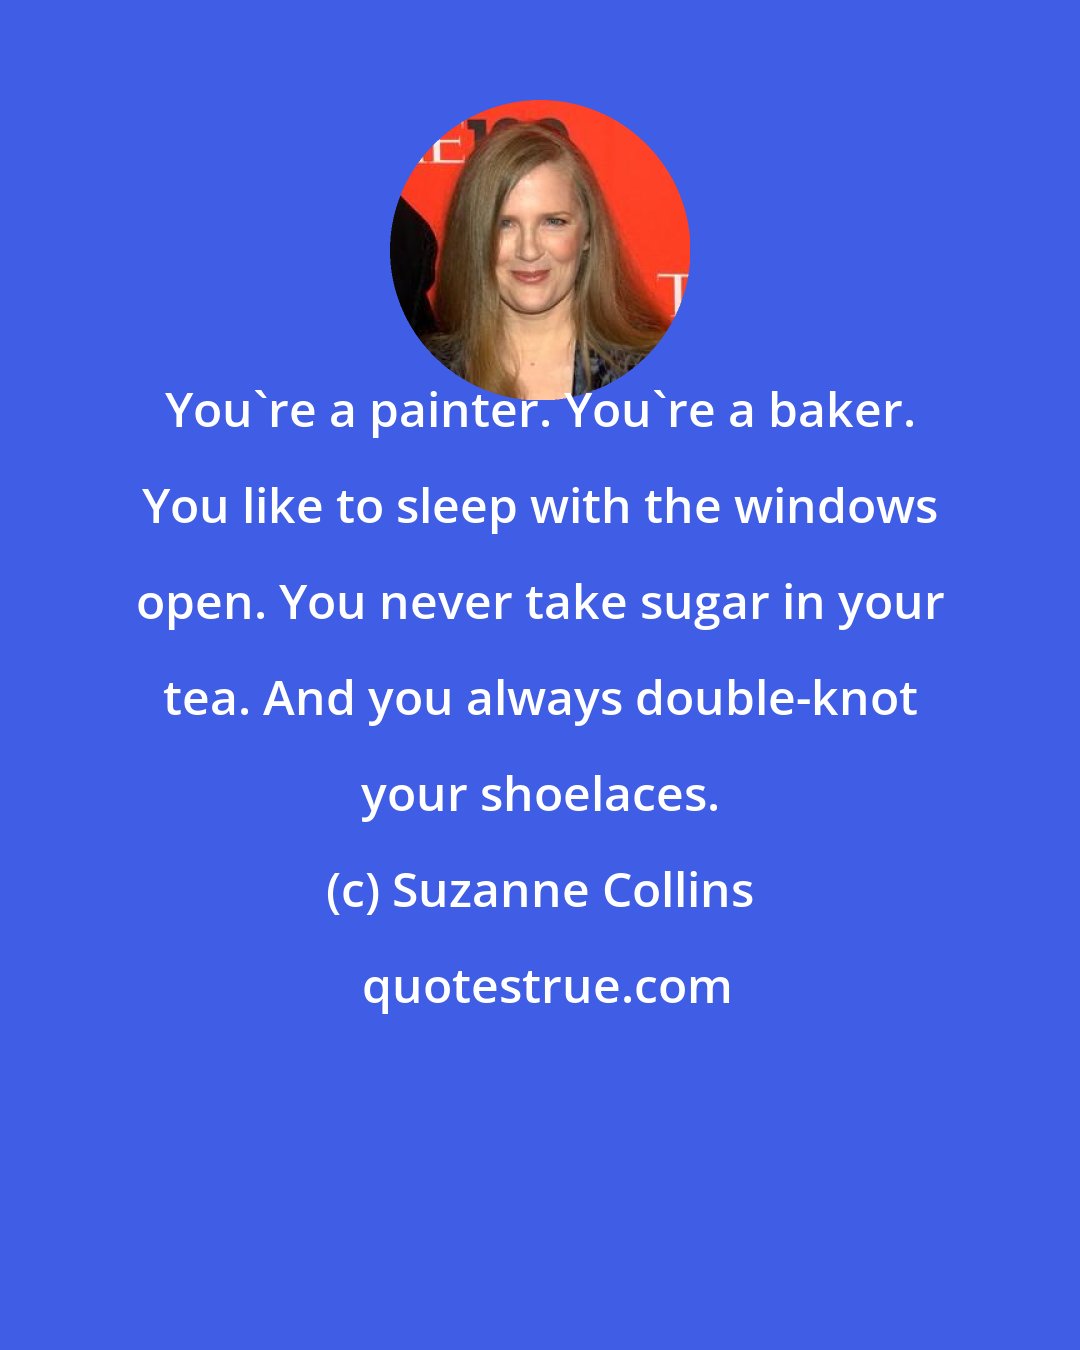 Suzanne Collins: You're a painter. You're a baker. You like to sleep with the windows open. You never take sugar in your tea. And you always double-knot your shoelaces.